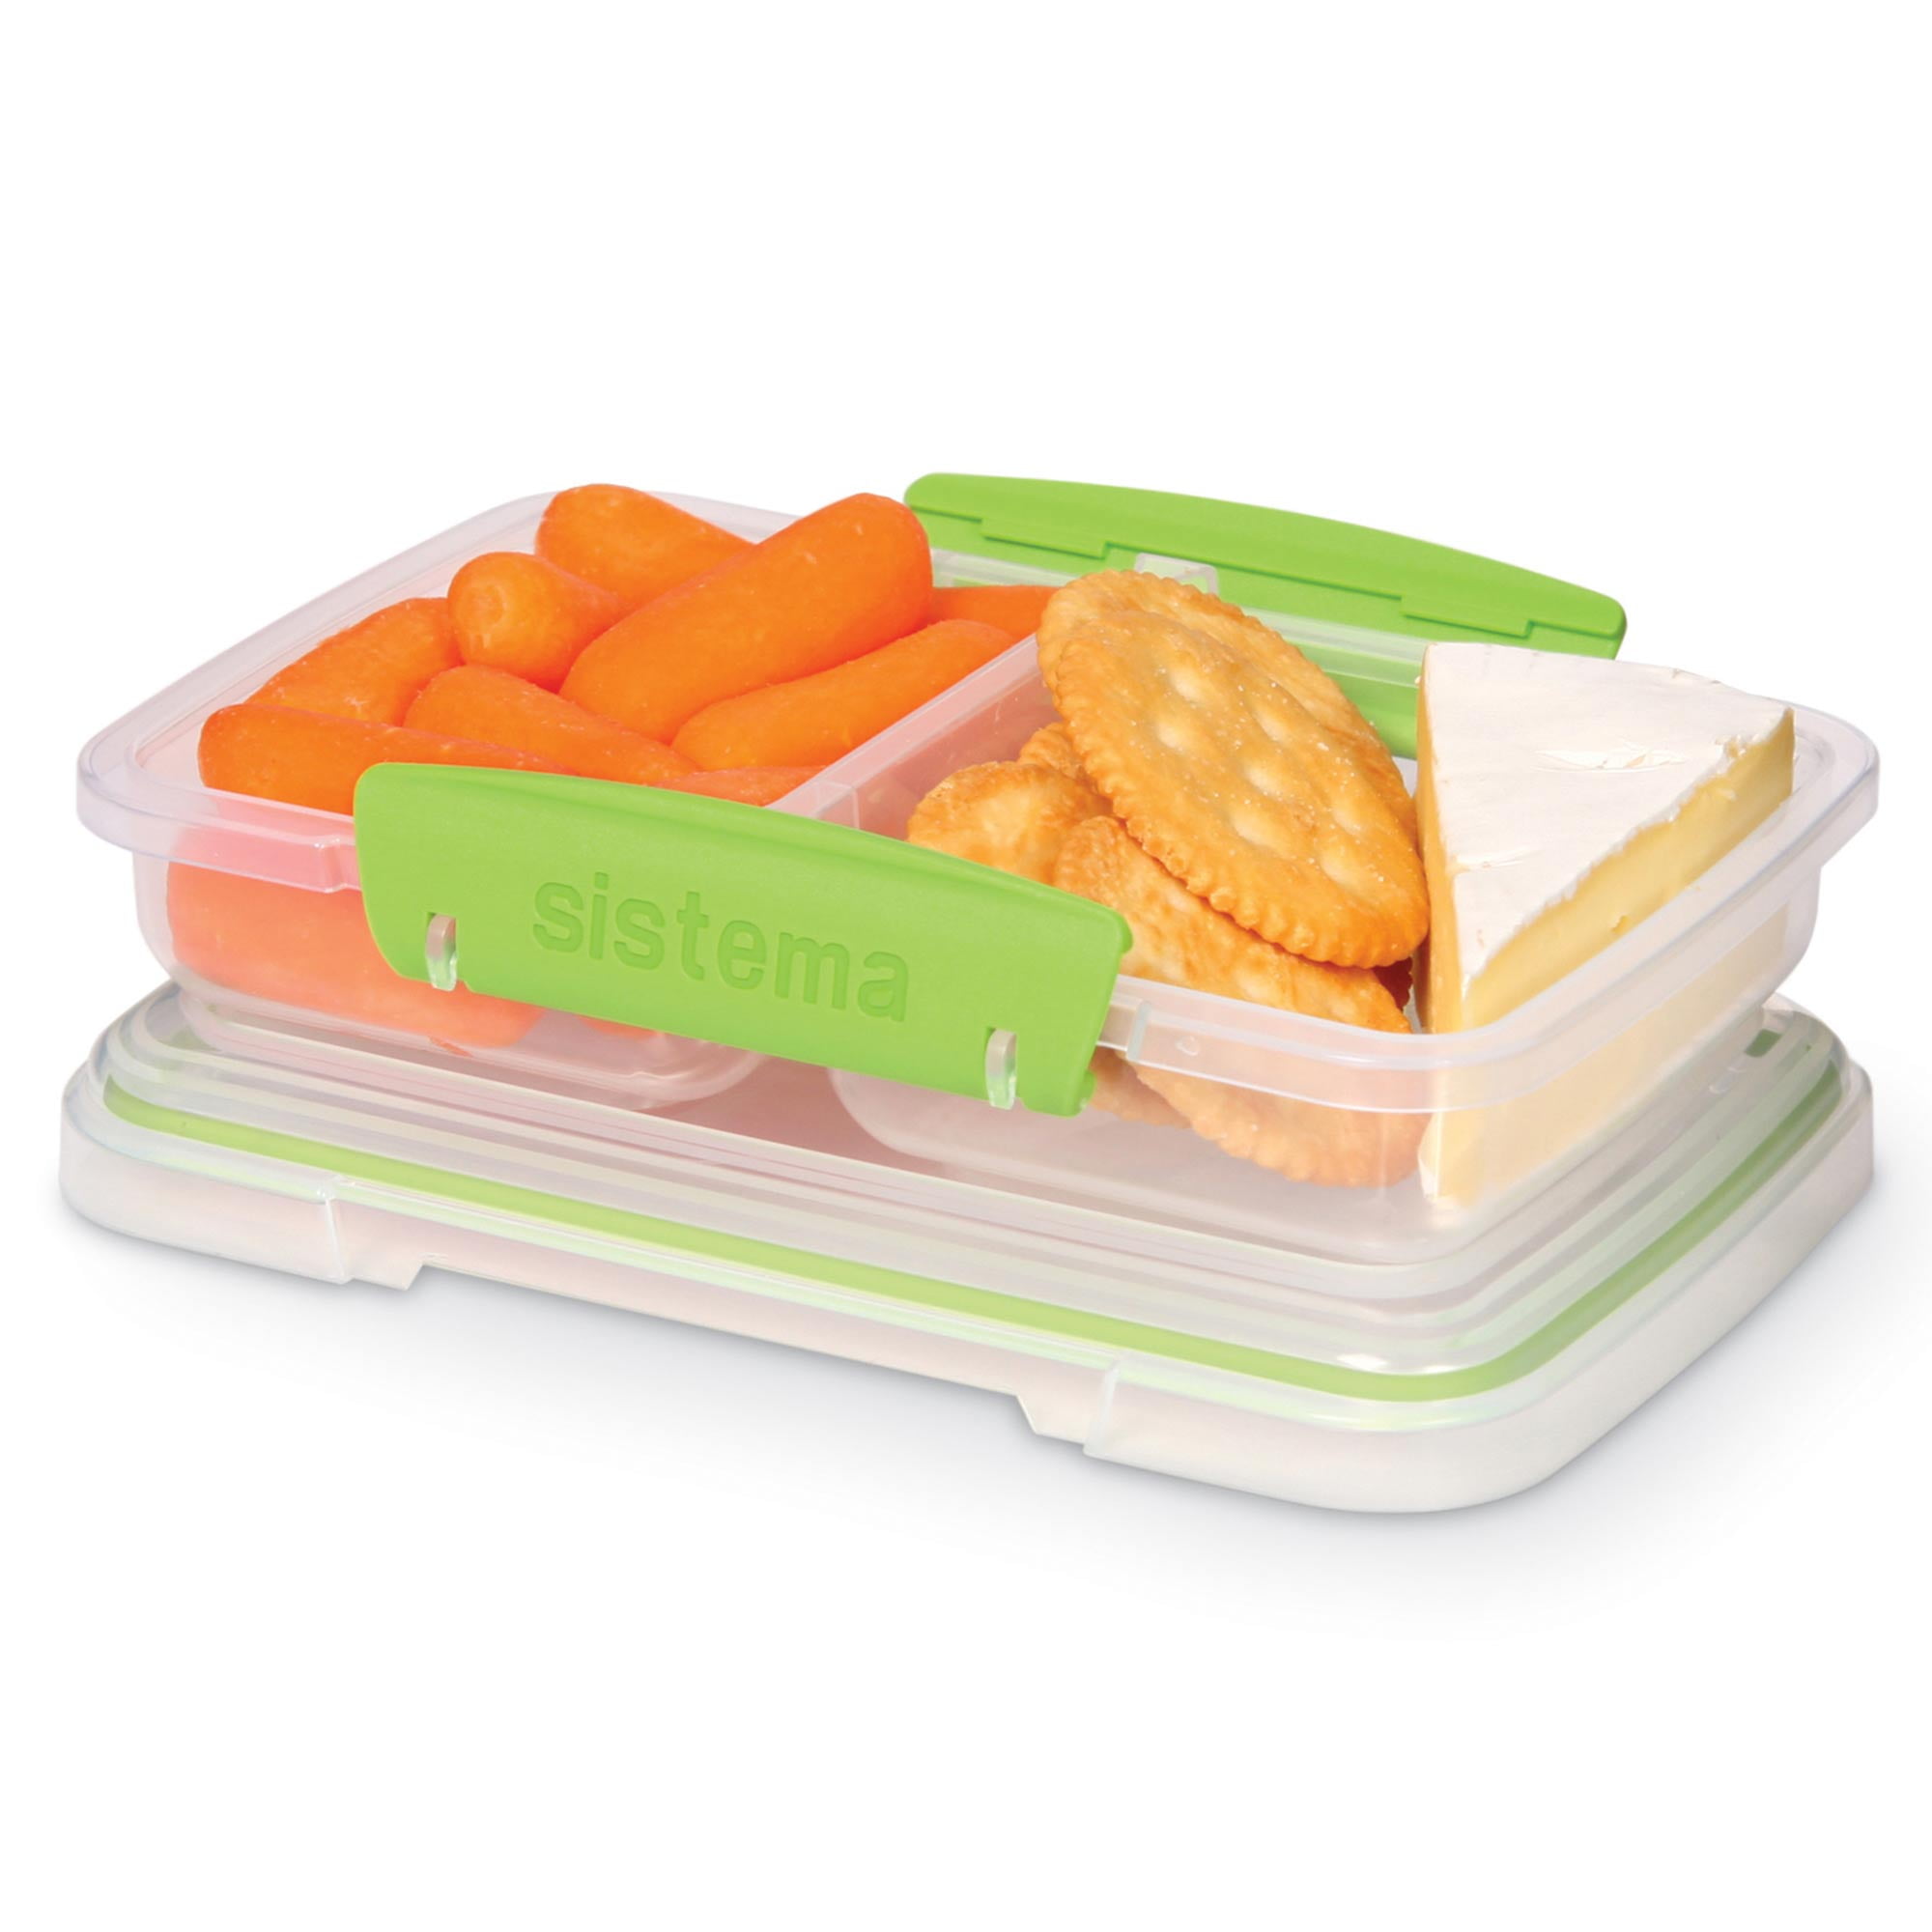 Sistema sistema 11.8 ounce small split storage container (colors may vary)